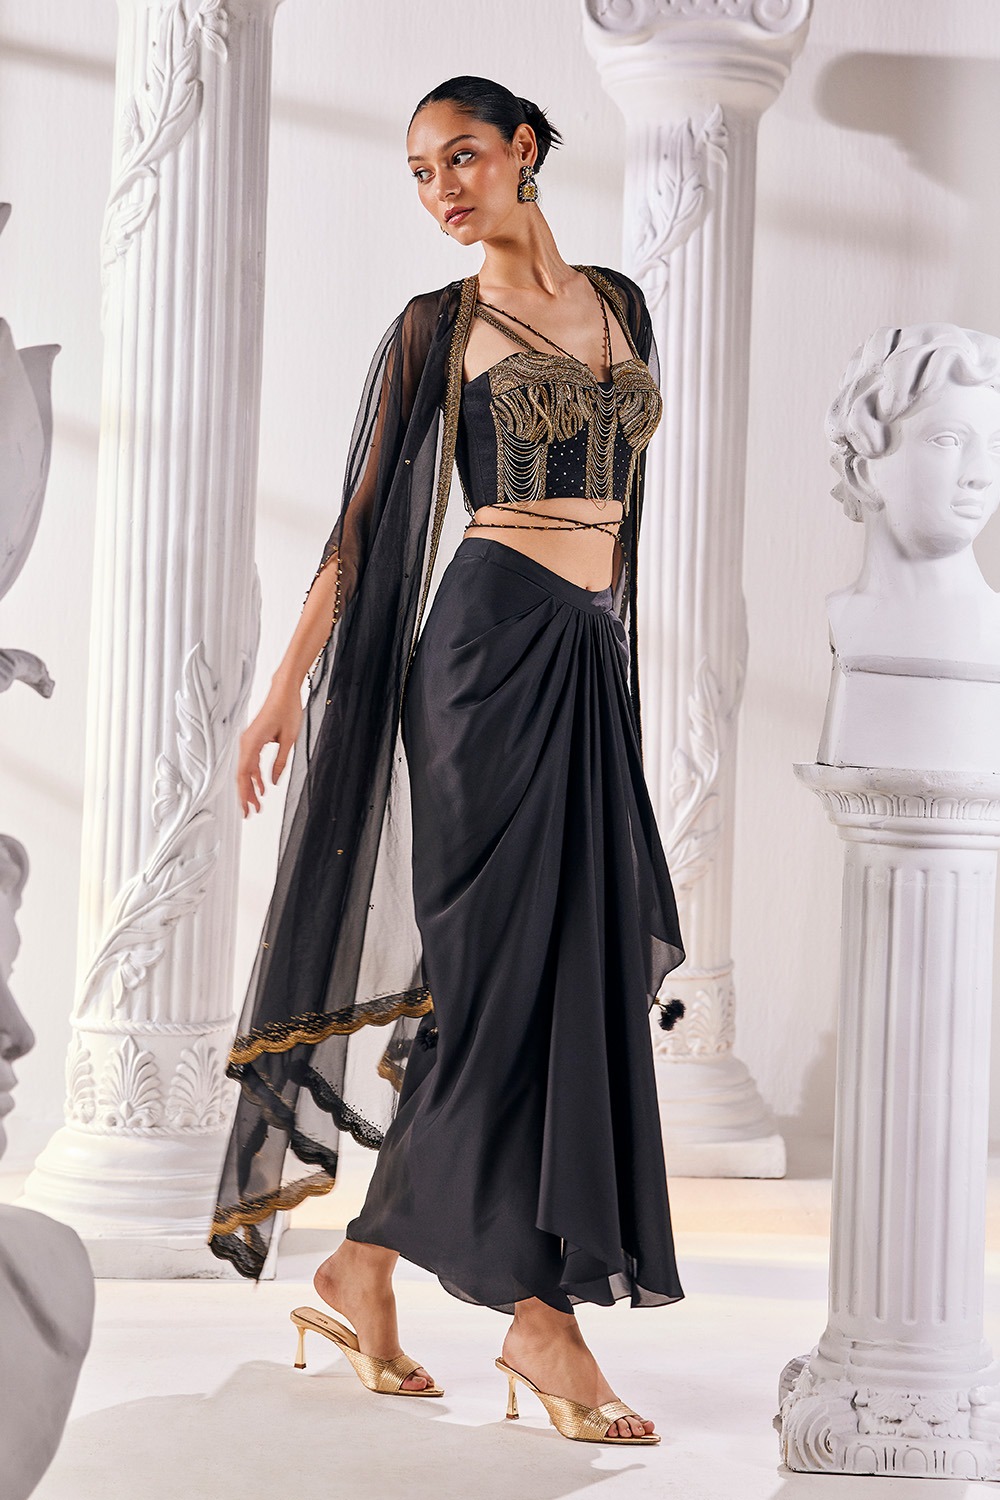 Draped Skirt With An Corset Blouse, Cape And A Belt